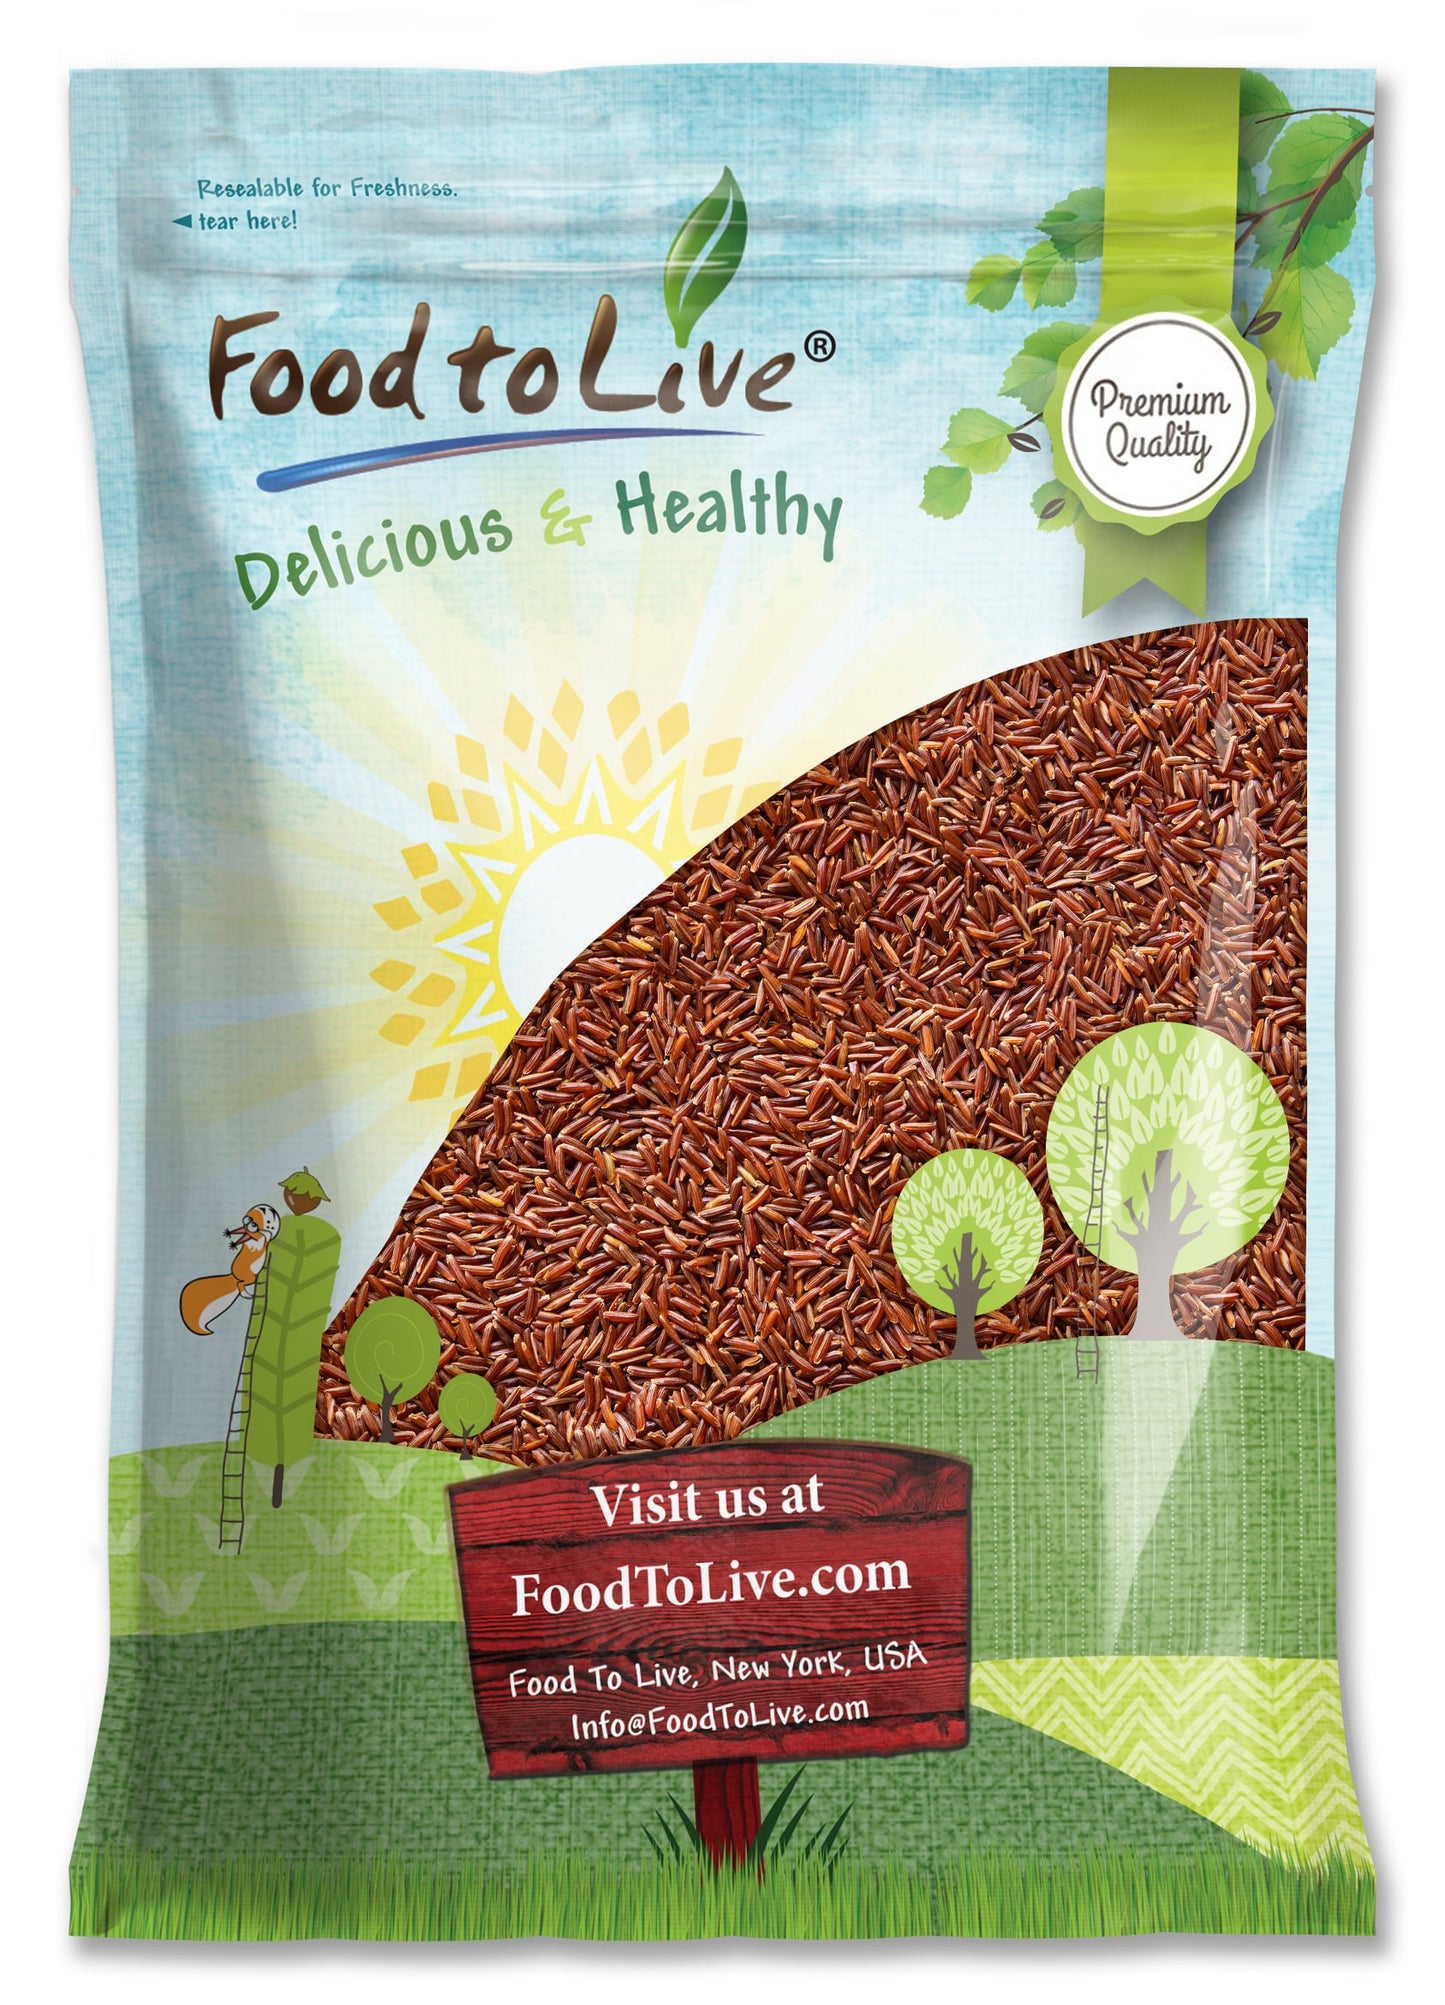 Red Rice - Whole Long-Grain Rice, Nutty Flavor, Soft Texture, Non-Sticky, Vegan, Bulk. Good Source of Protein and Antioxidants. Perfect for Pilafs, Salads, Stir-Fries, and Rice Bowls